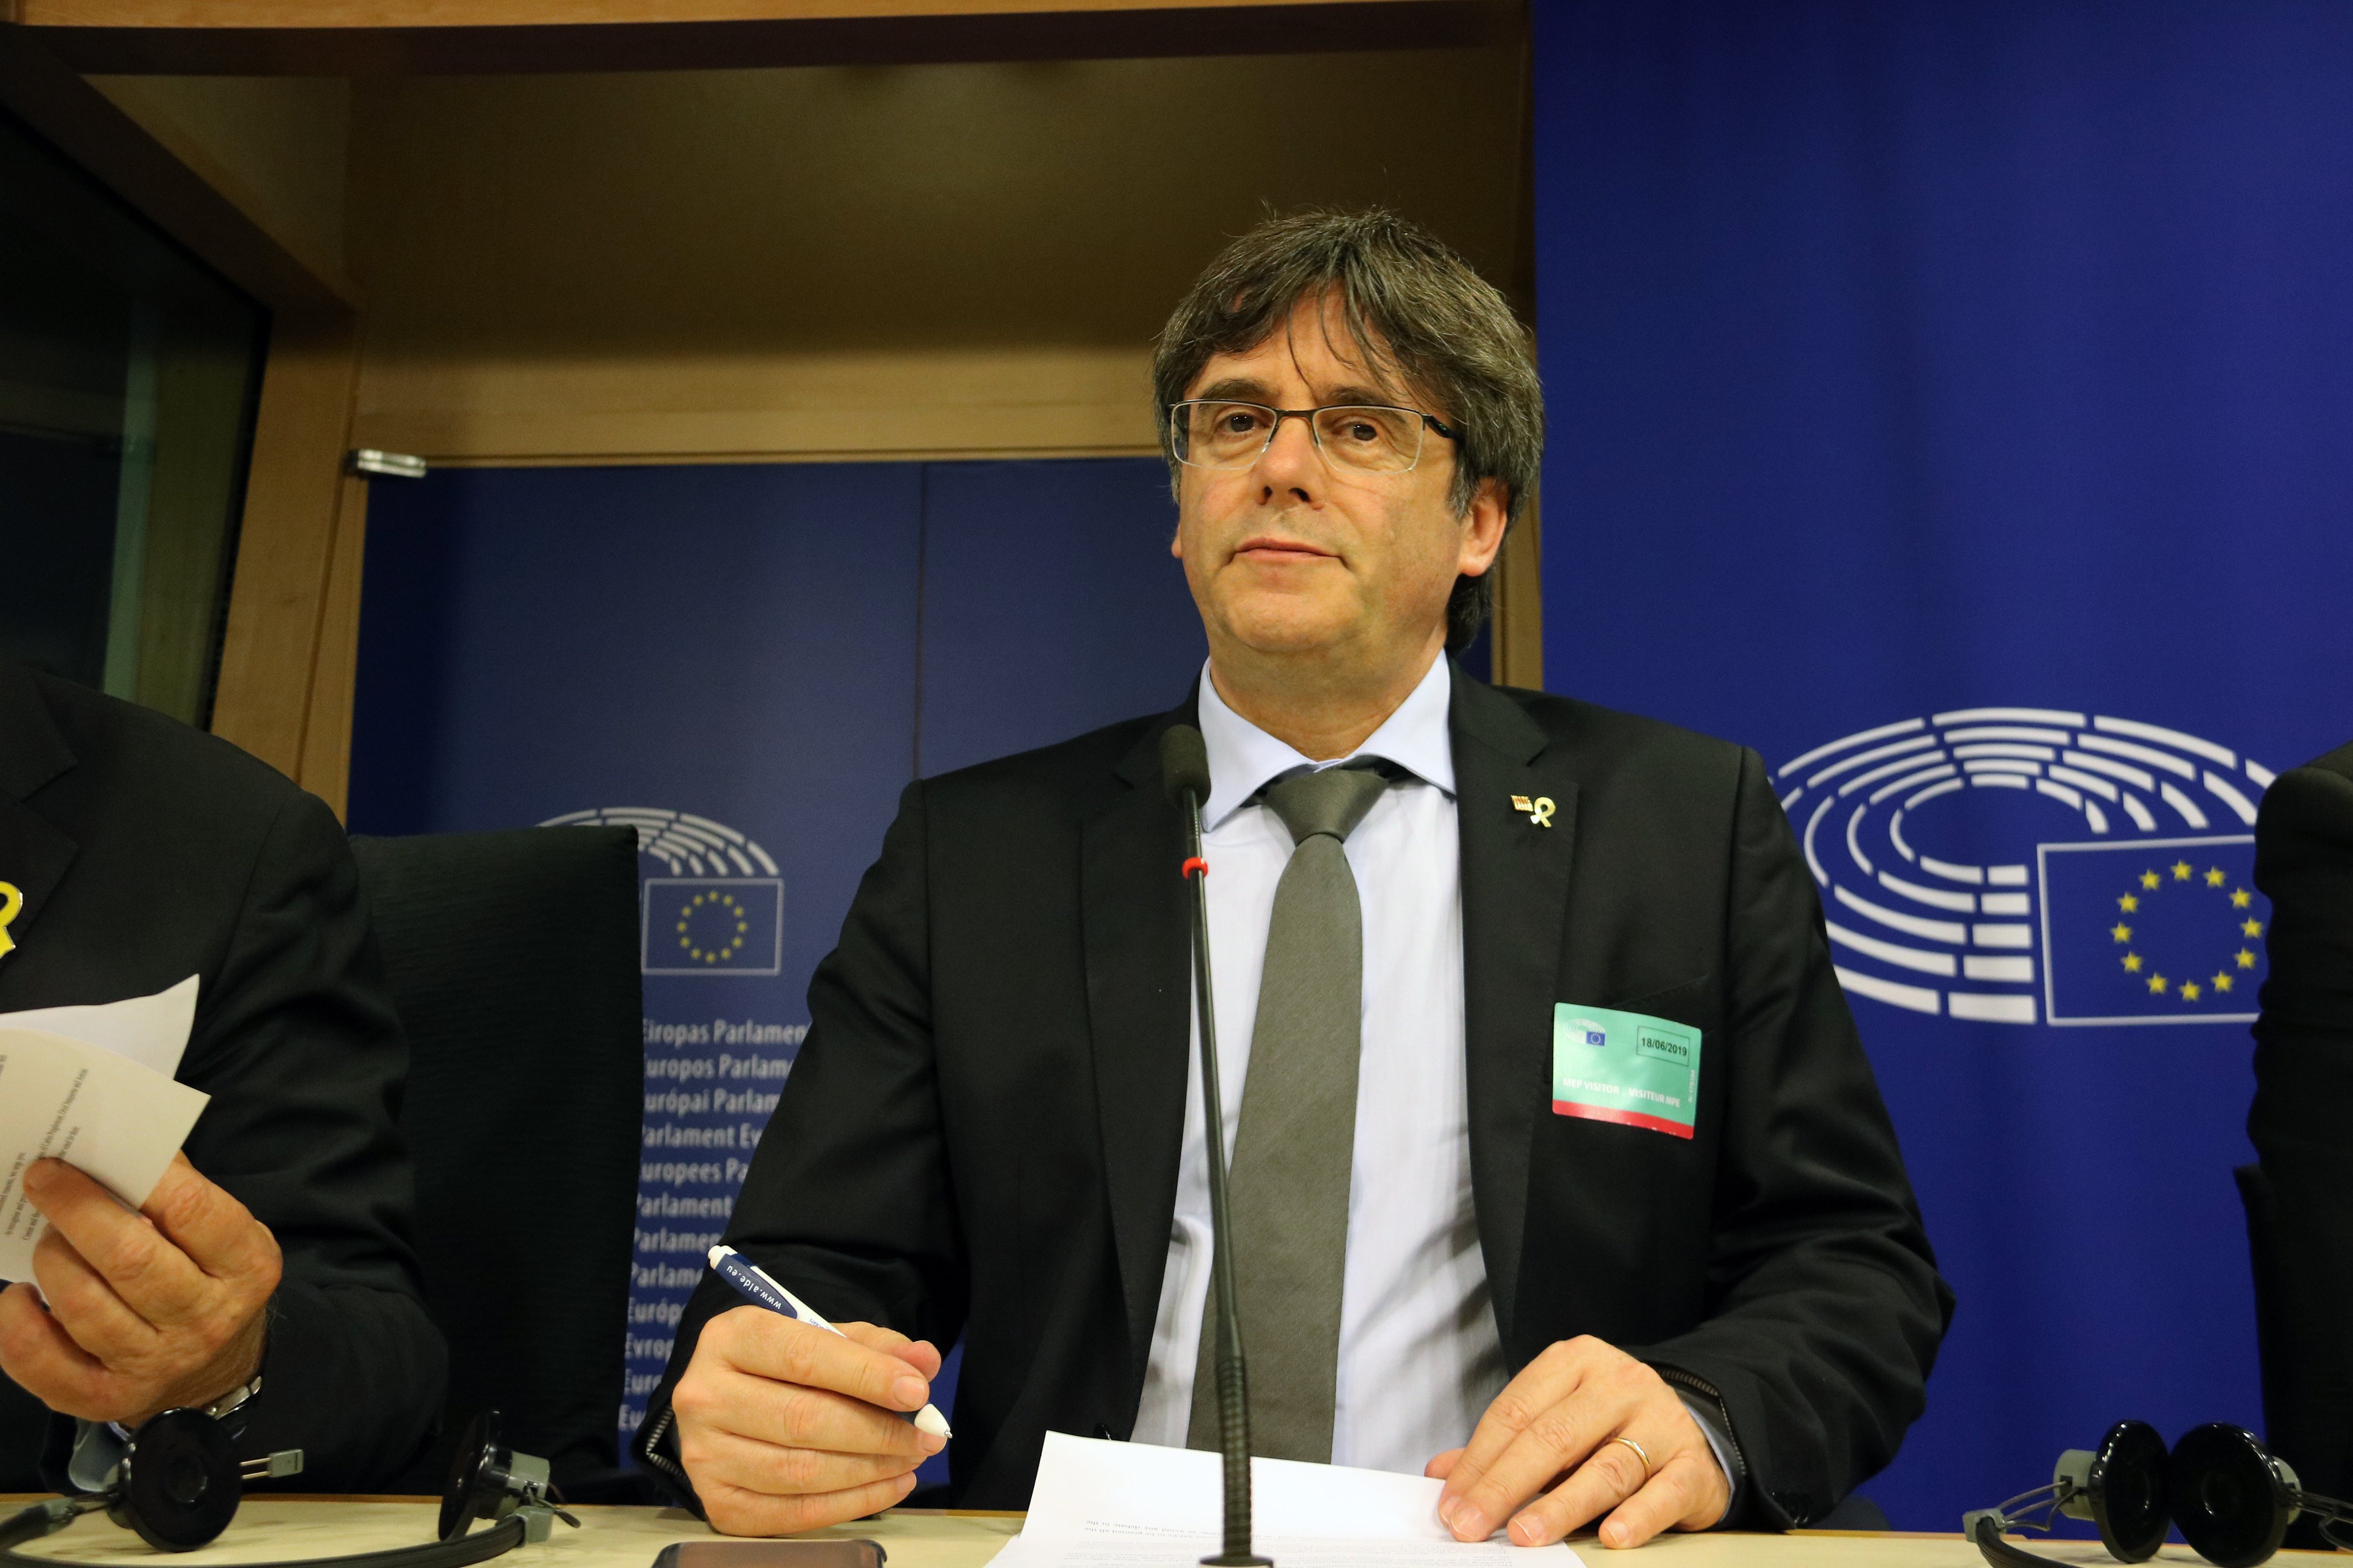 Puigdemont to attend opening of European Parliament